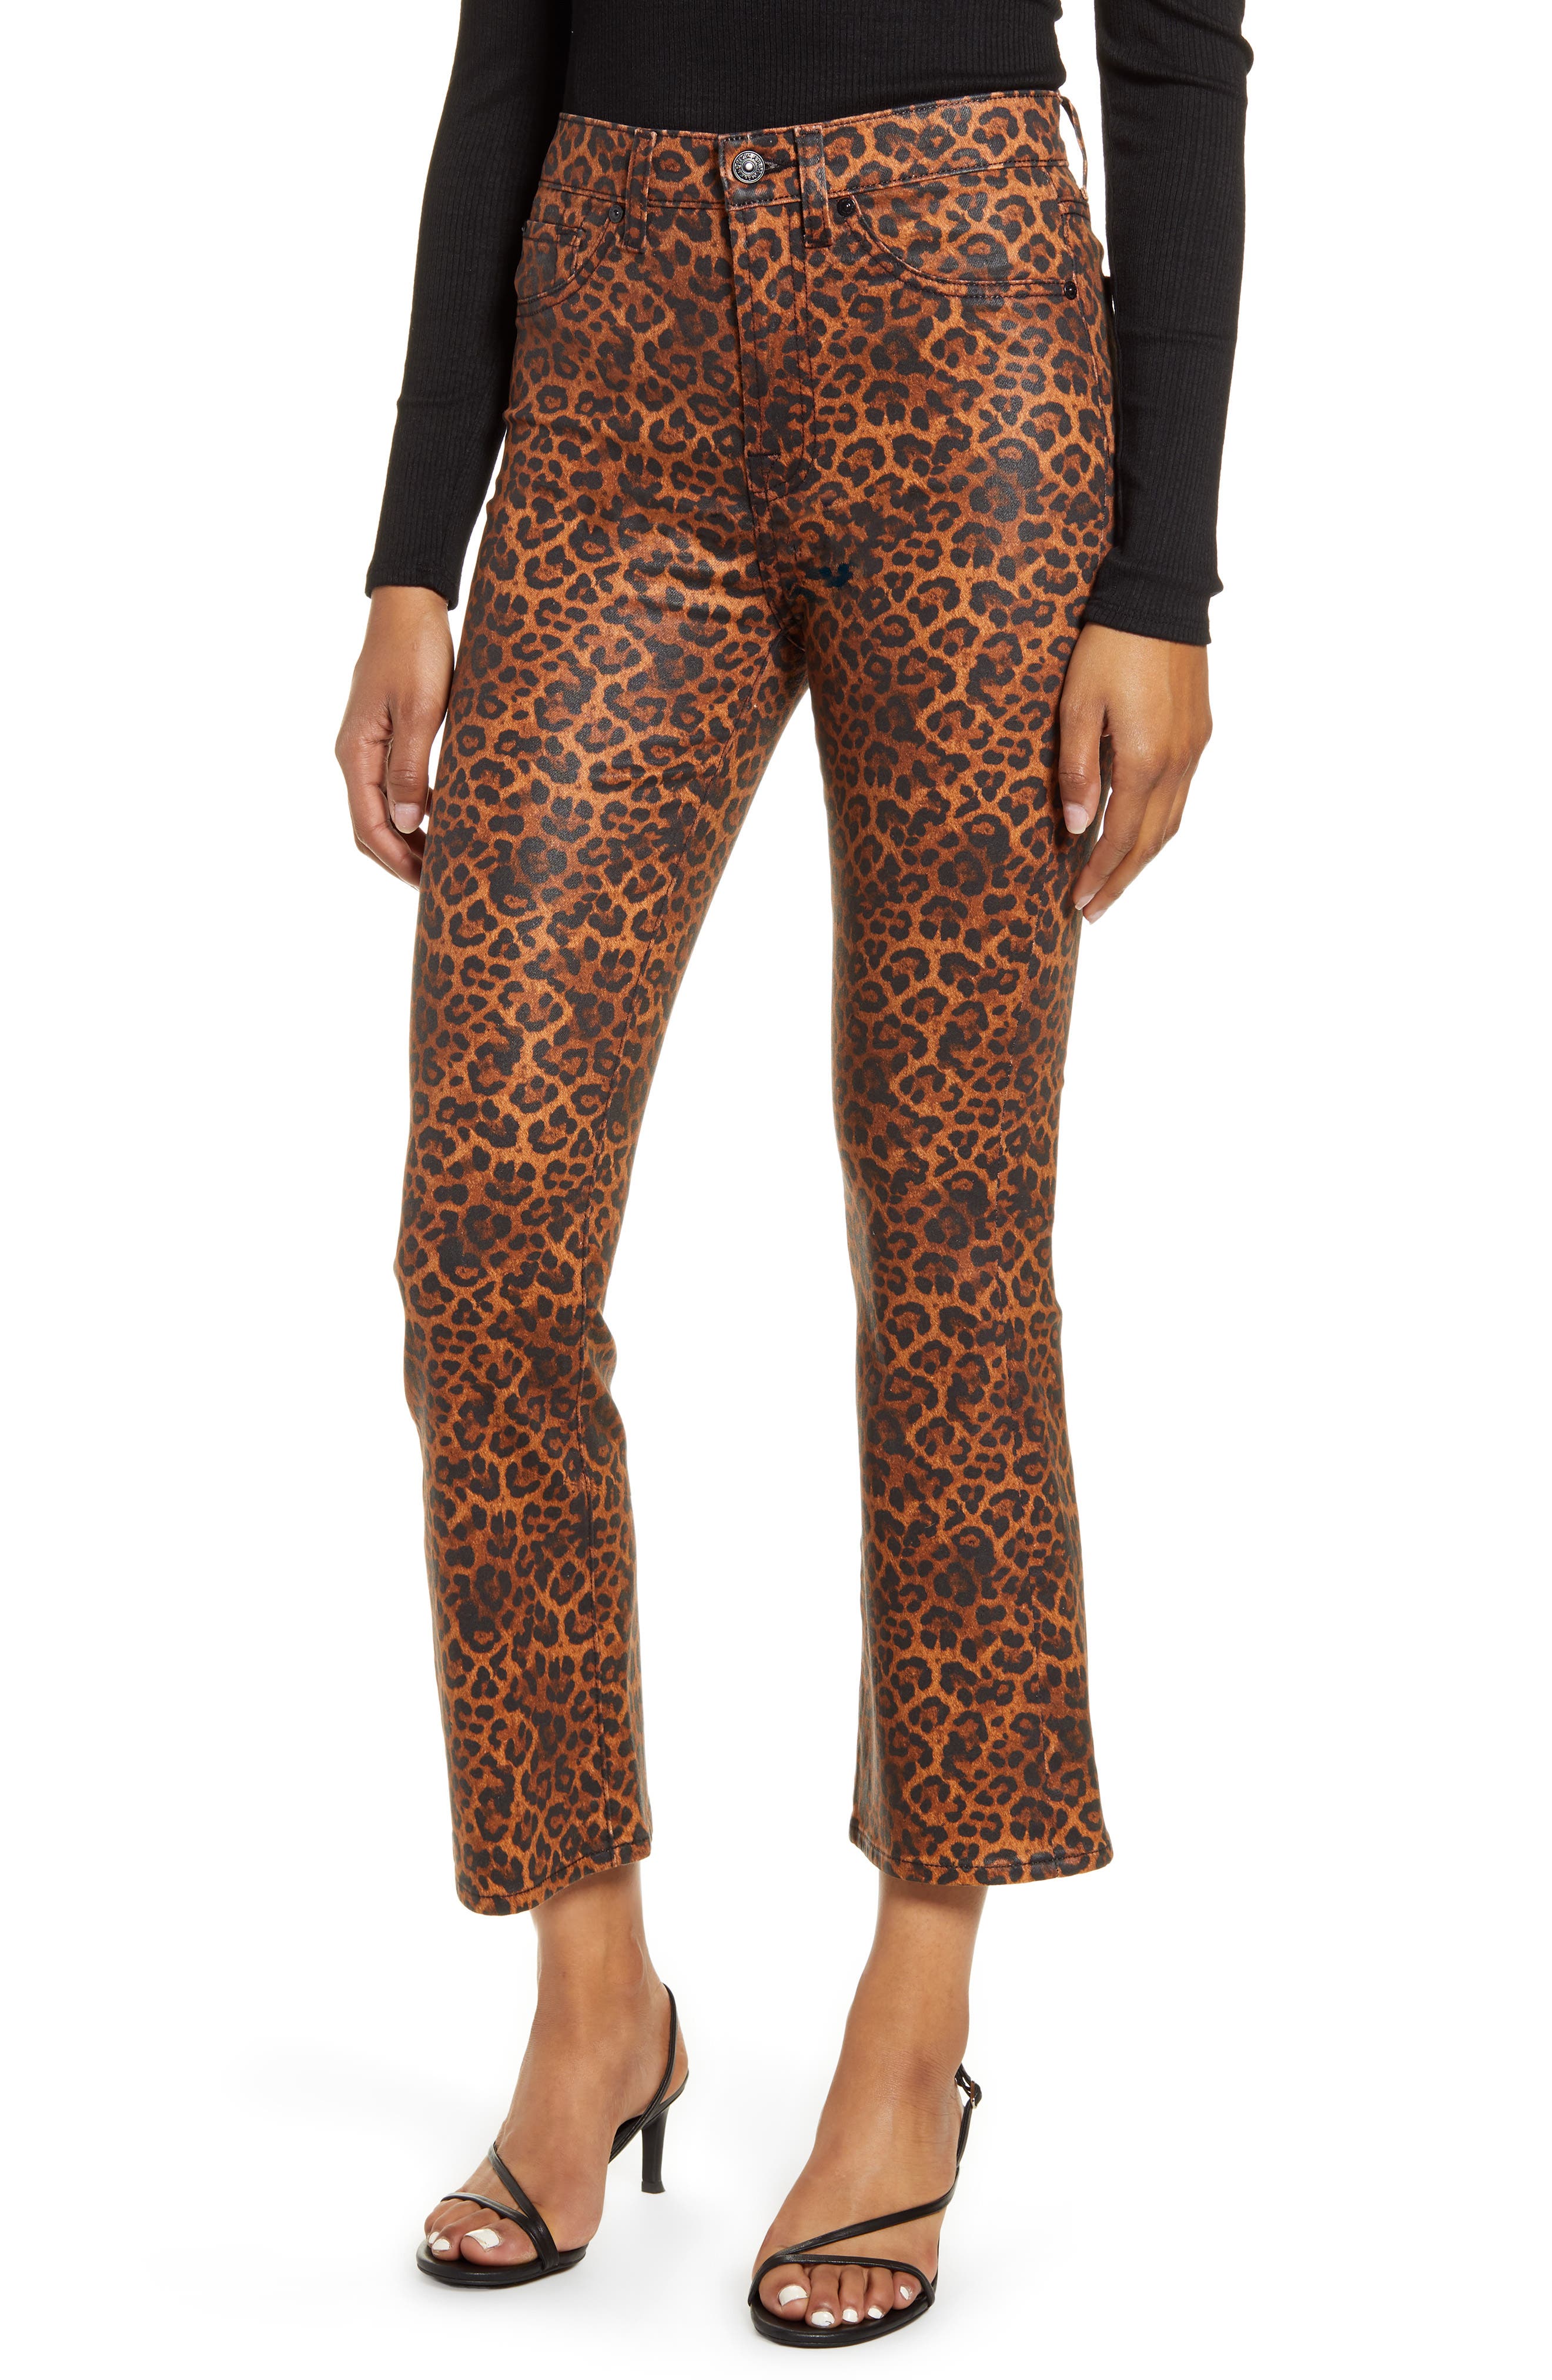 7 for all mankind leopard print jeans